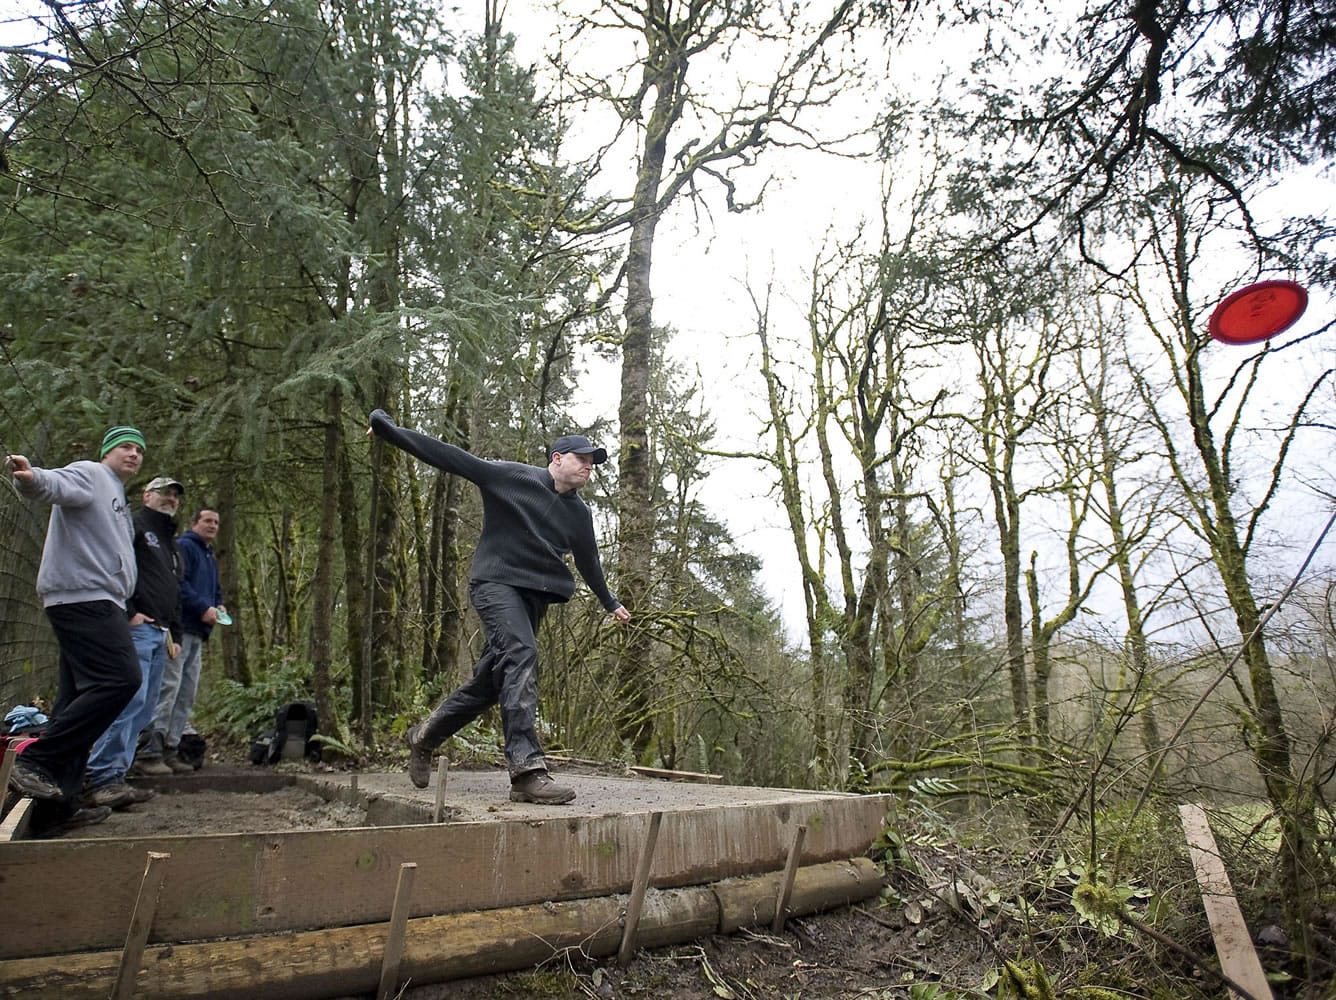 Josh Dearing of Vancouver takes his first shot on Sunday from the tee box of the third hole at the new disc golf course at Paradise Point State Park in La Center.